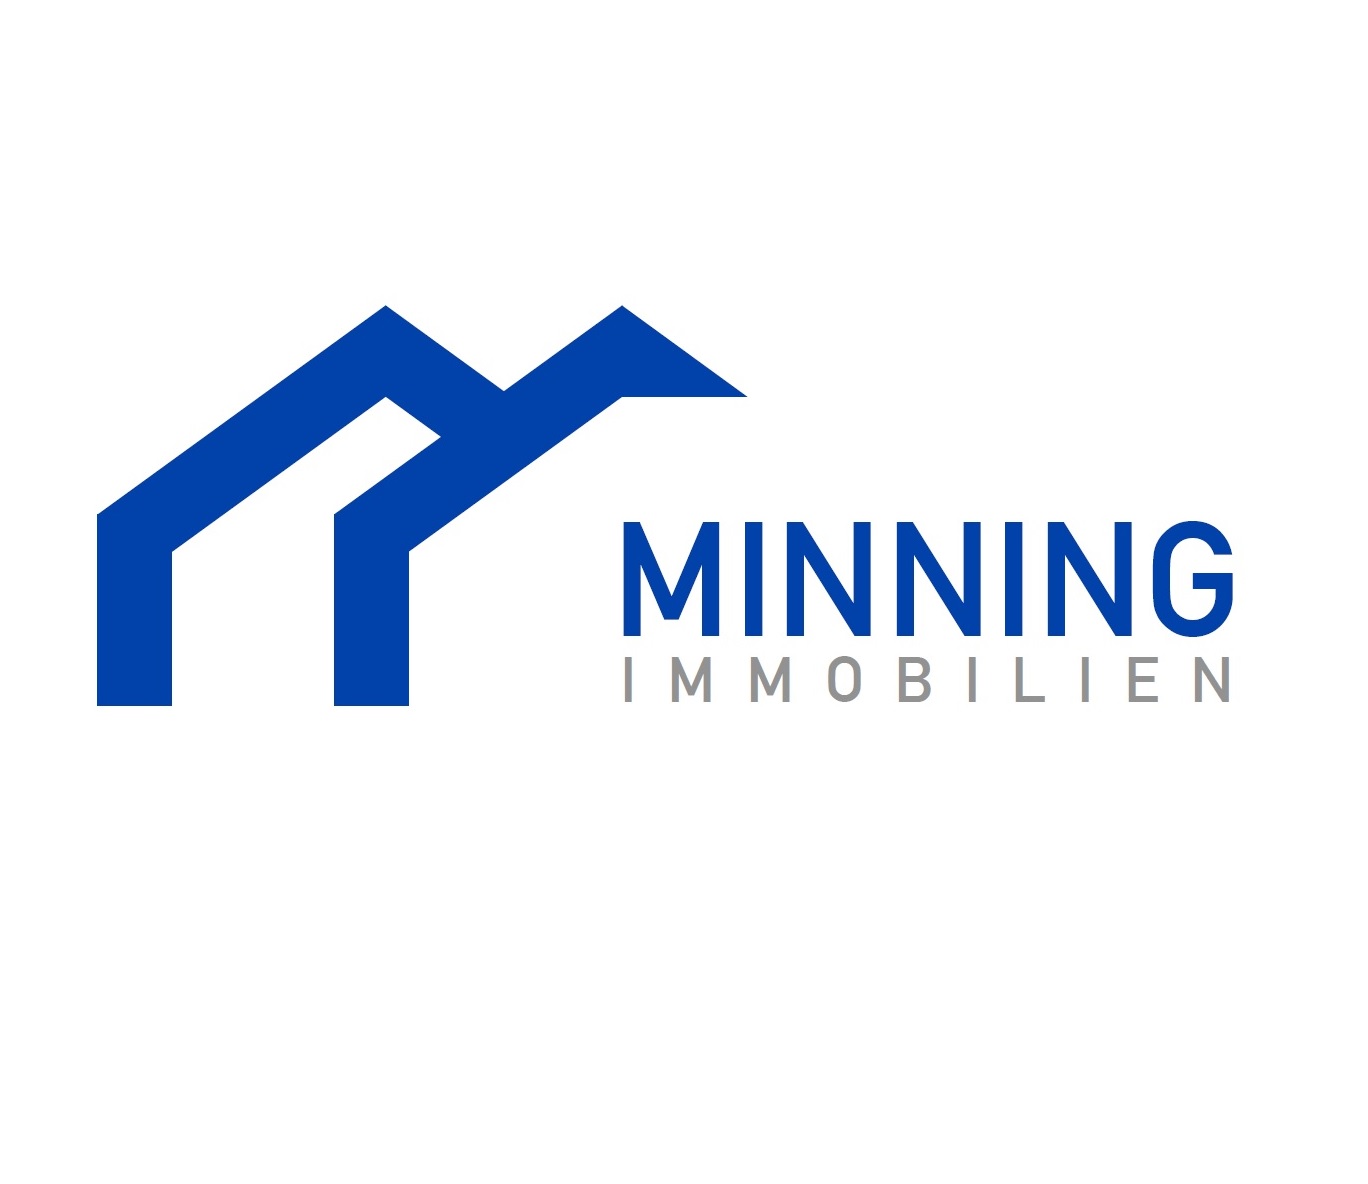 Bild 2 Minning Immobilien in Hannover